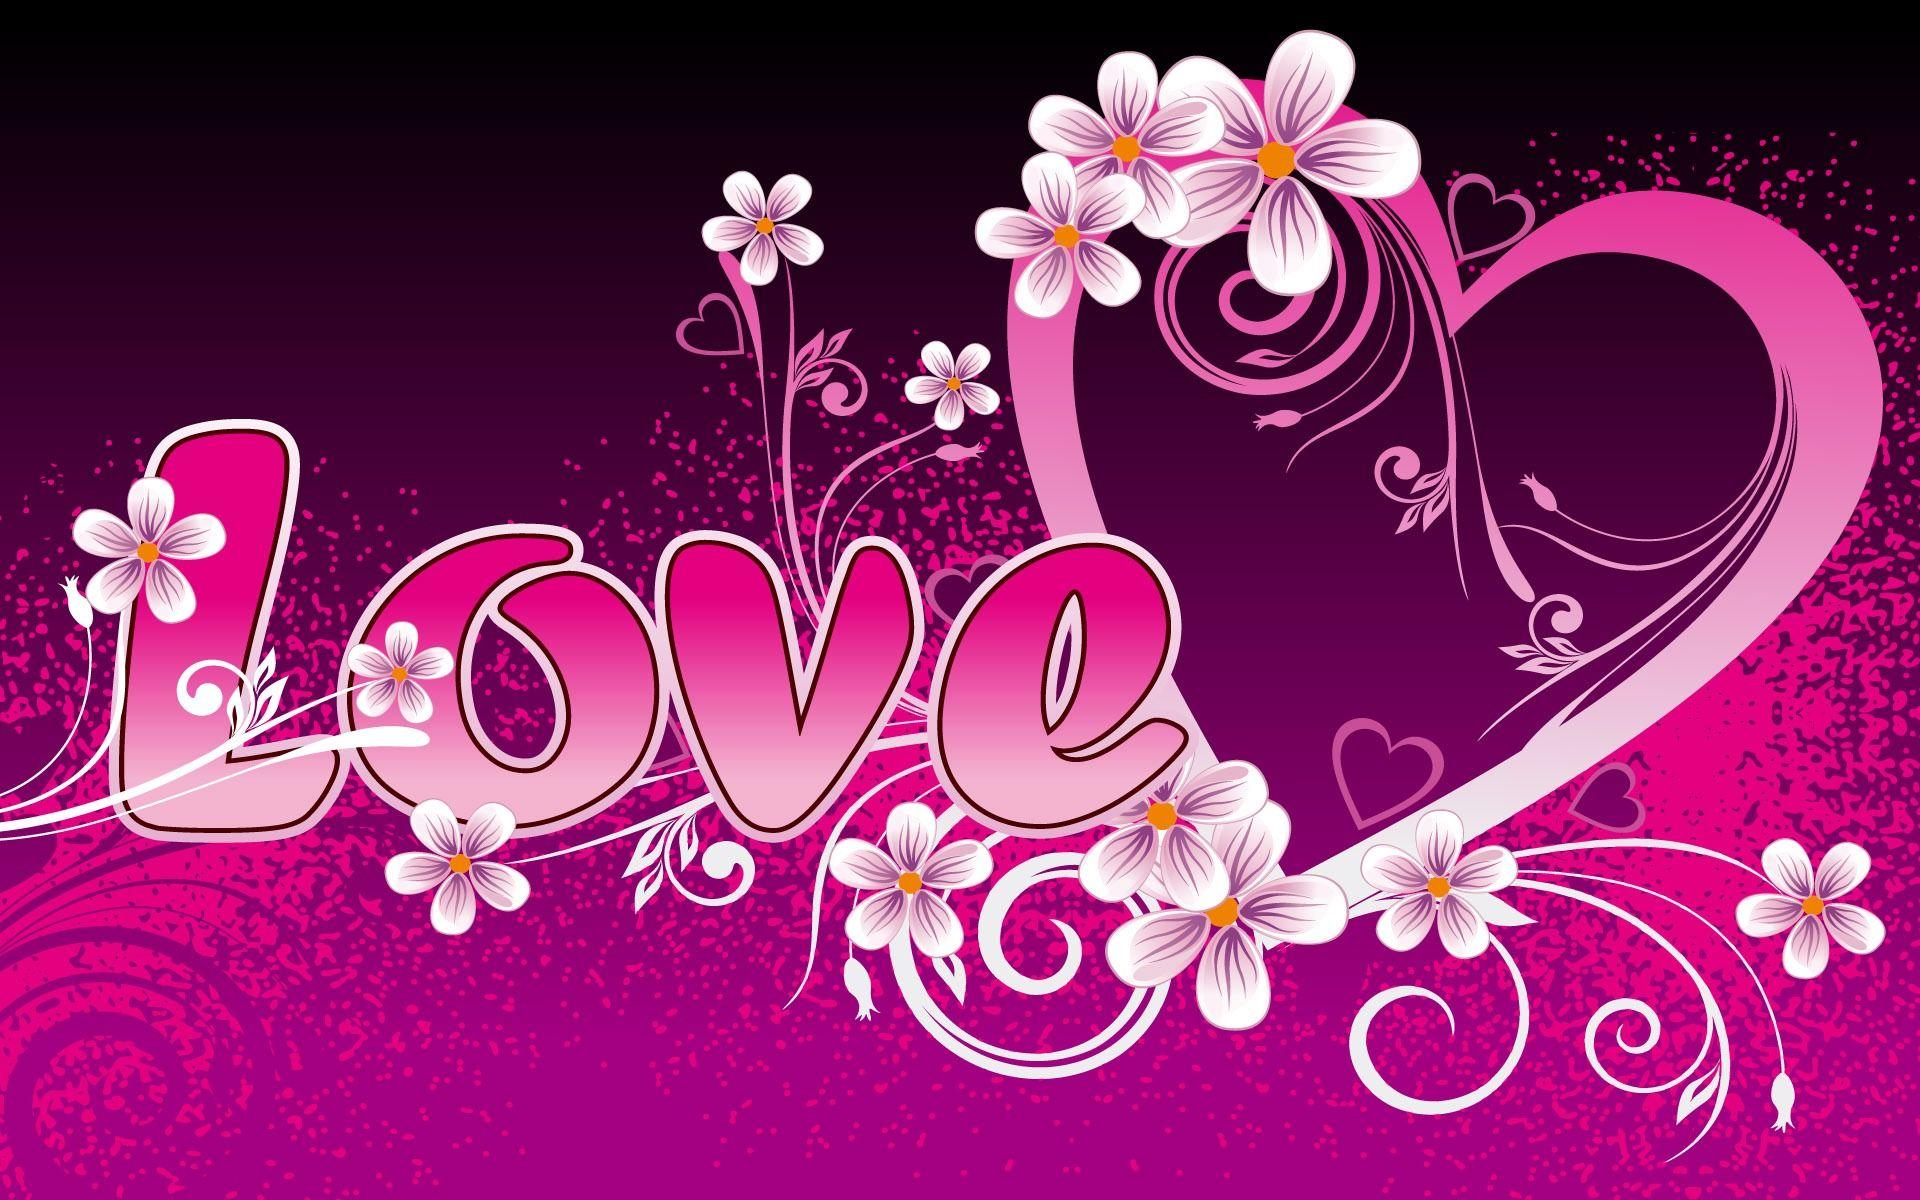 Love Heart And Flowers Wallpaper 1920x1200 px Free Download